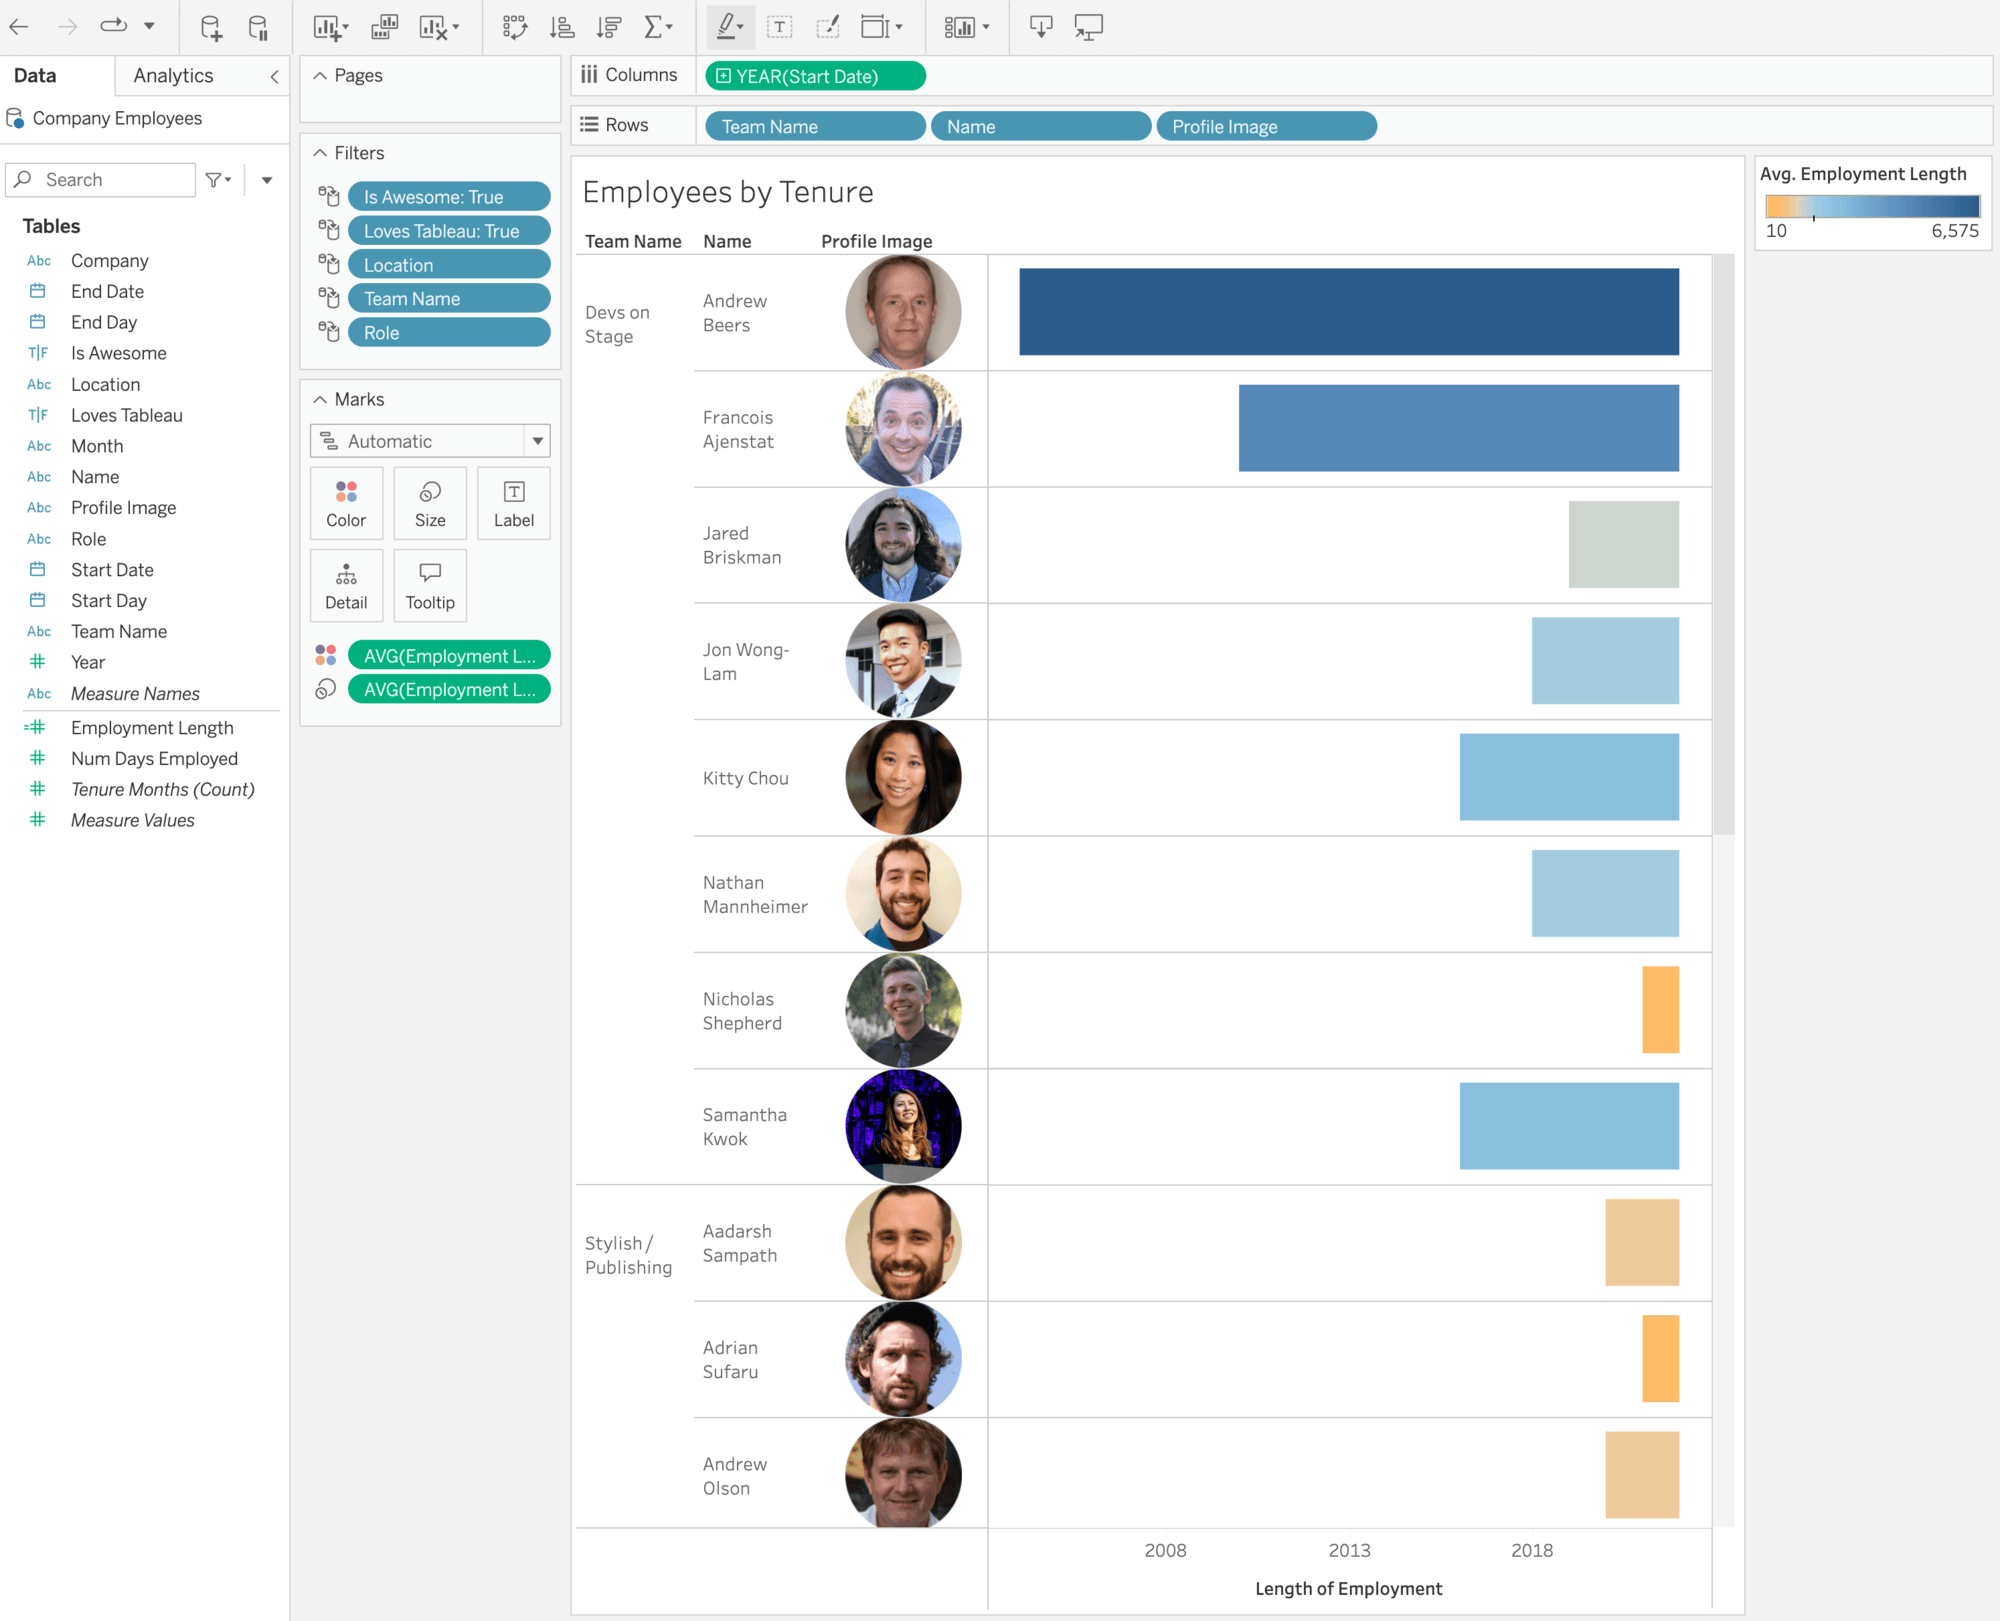 Tableau interface showing a visualization where the user has dynamically added images from a field containing image URLs